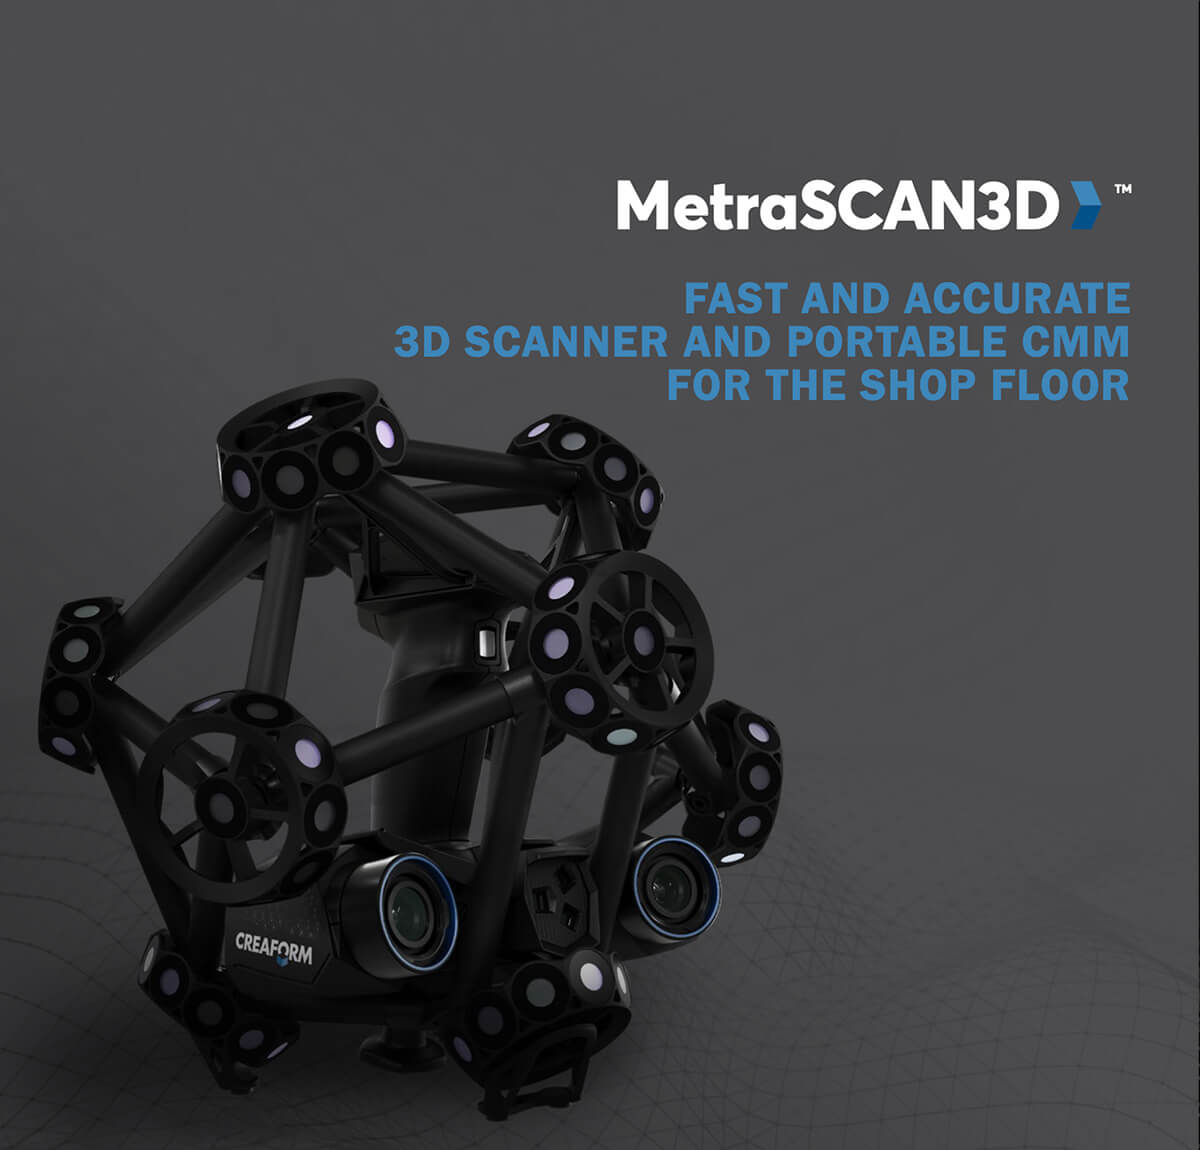 Metrascan3d fast and accurate 3d scanner and portable cmm for the shop floor